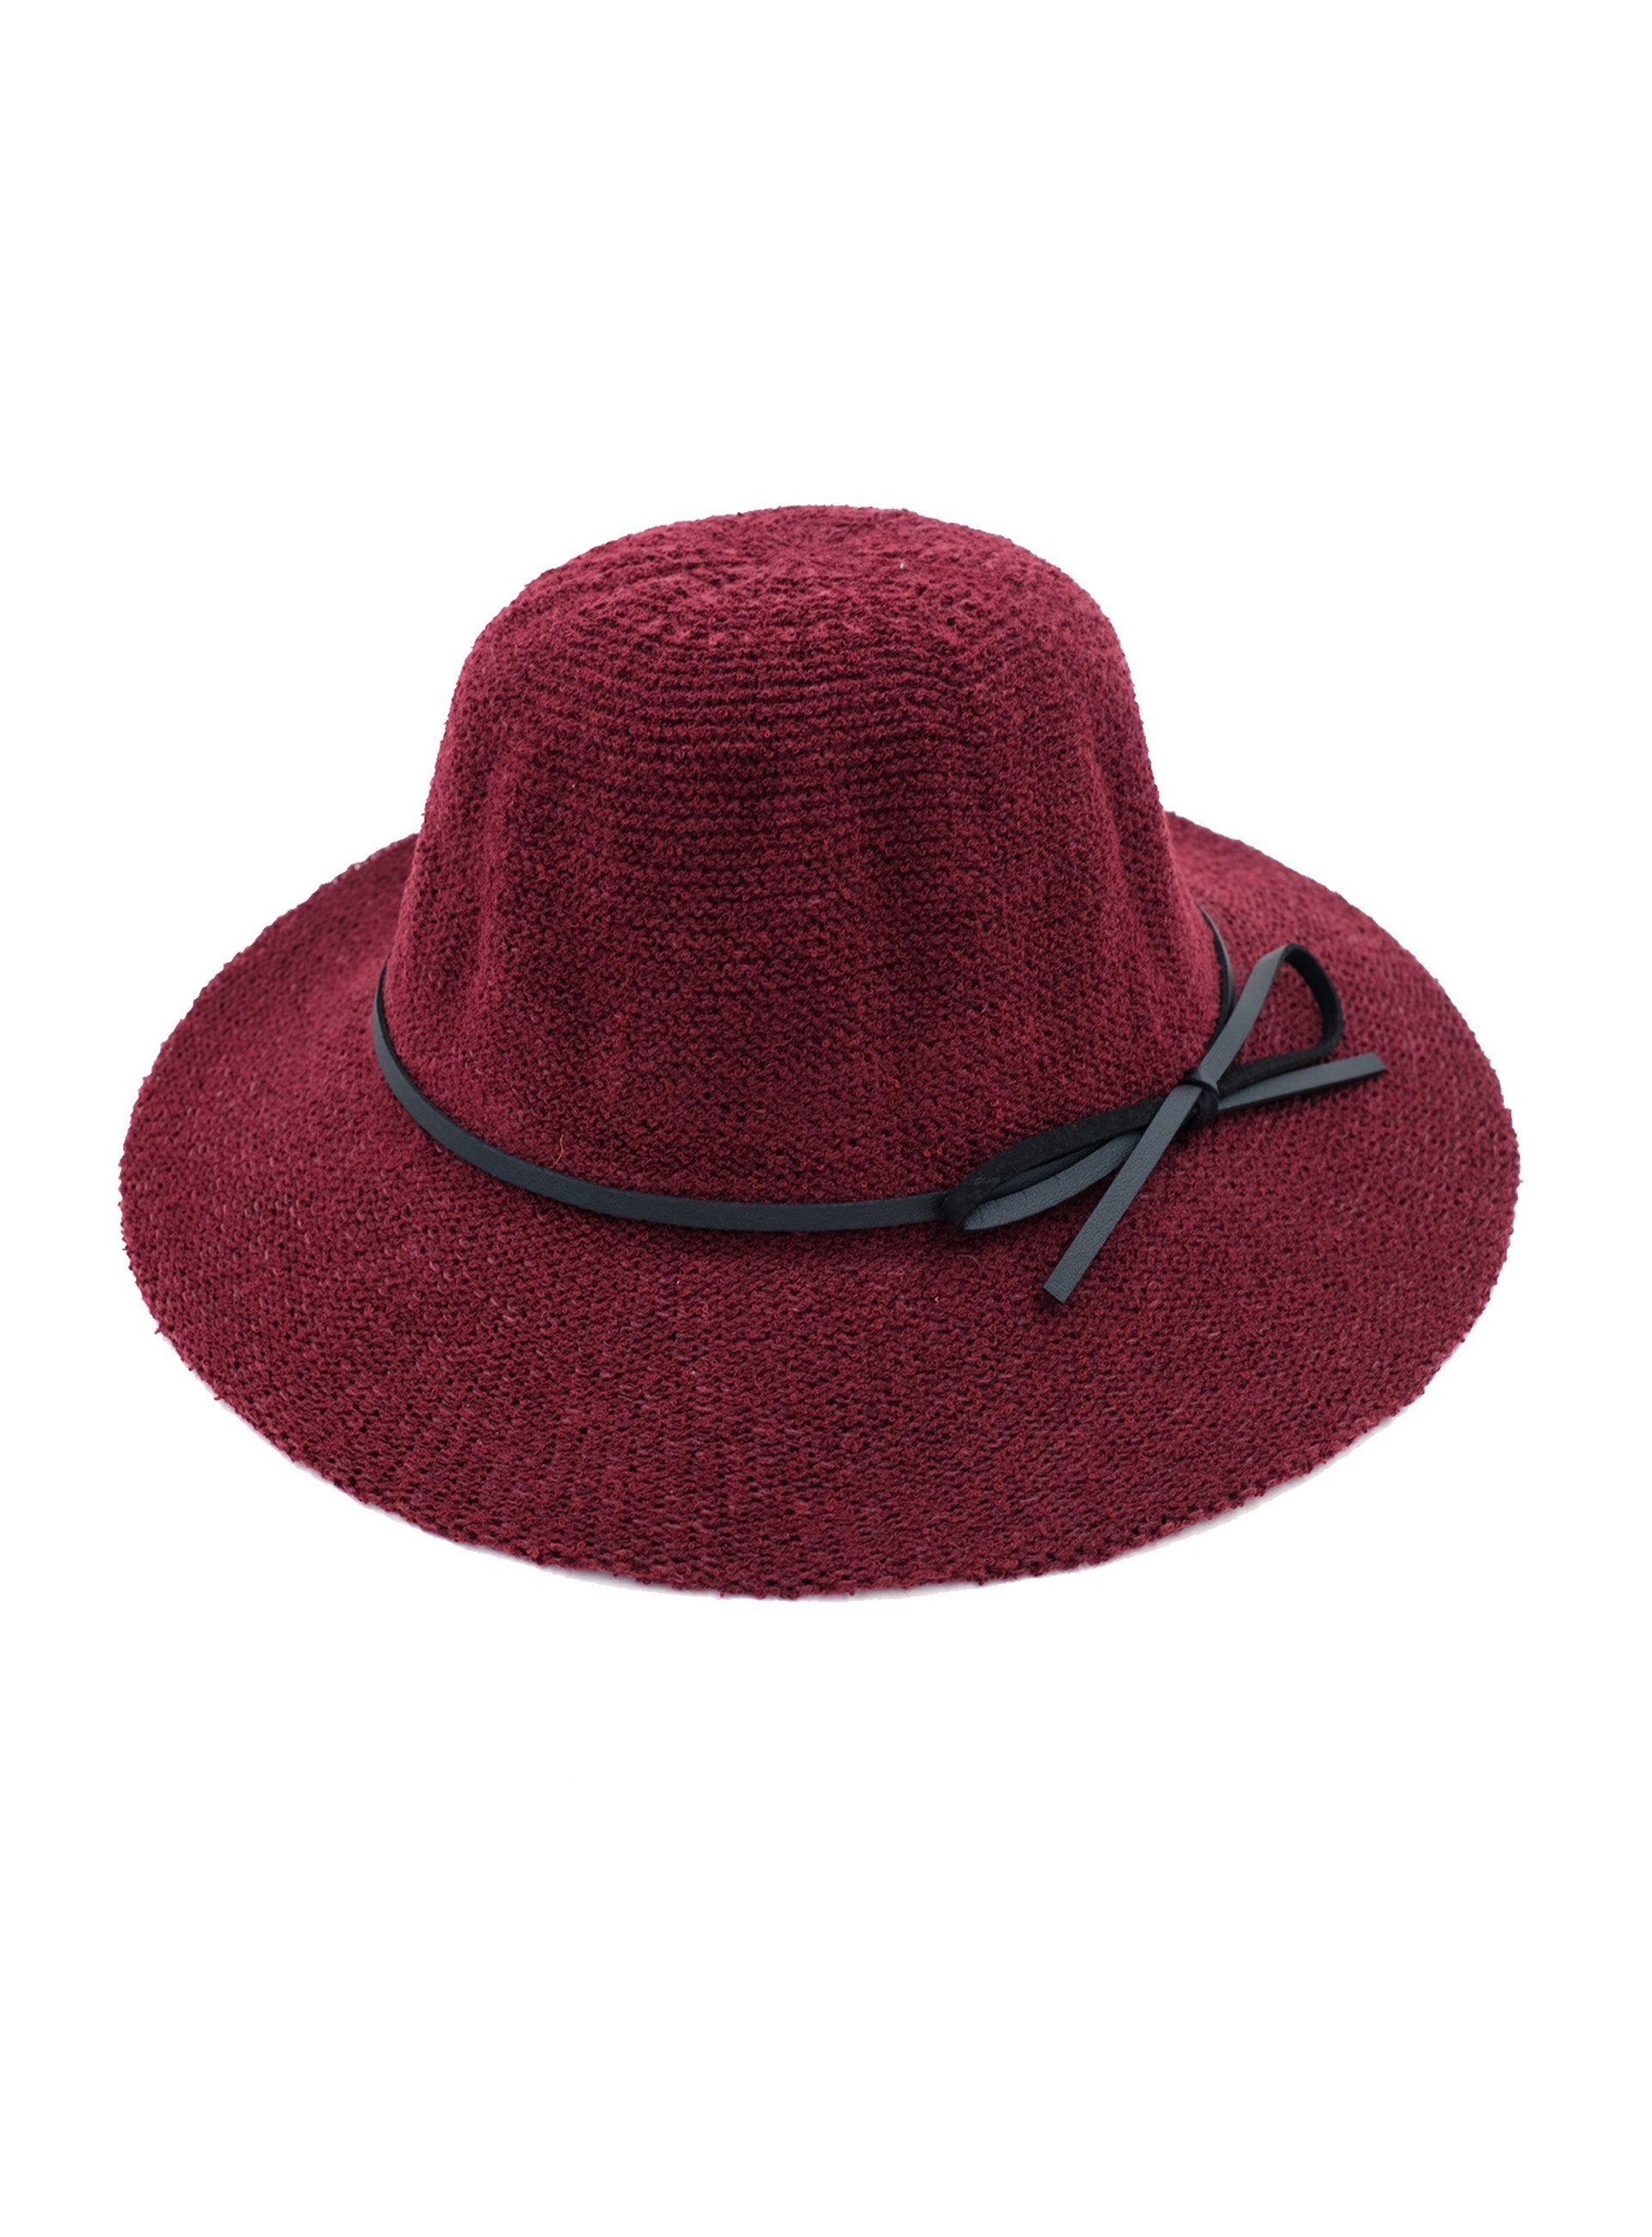 cherry red floppy hat with ribbon